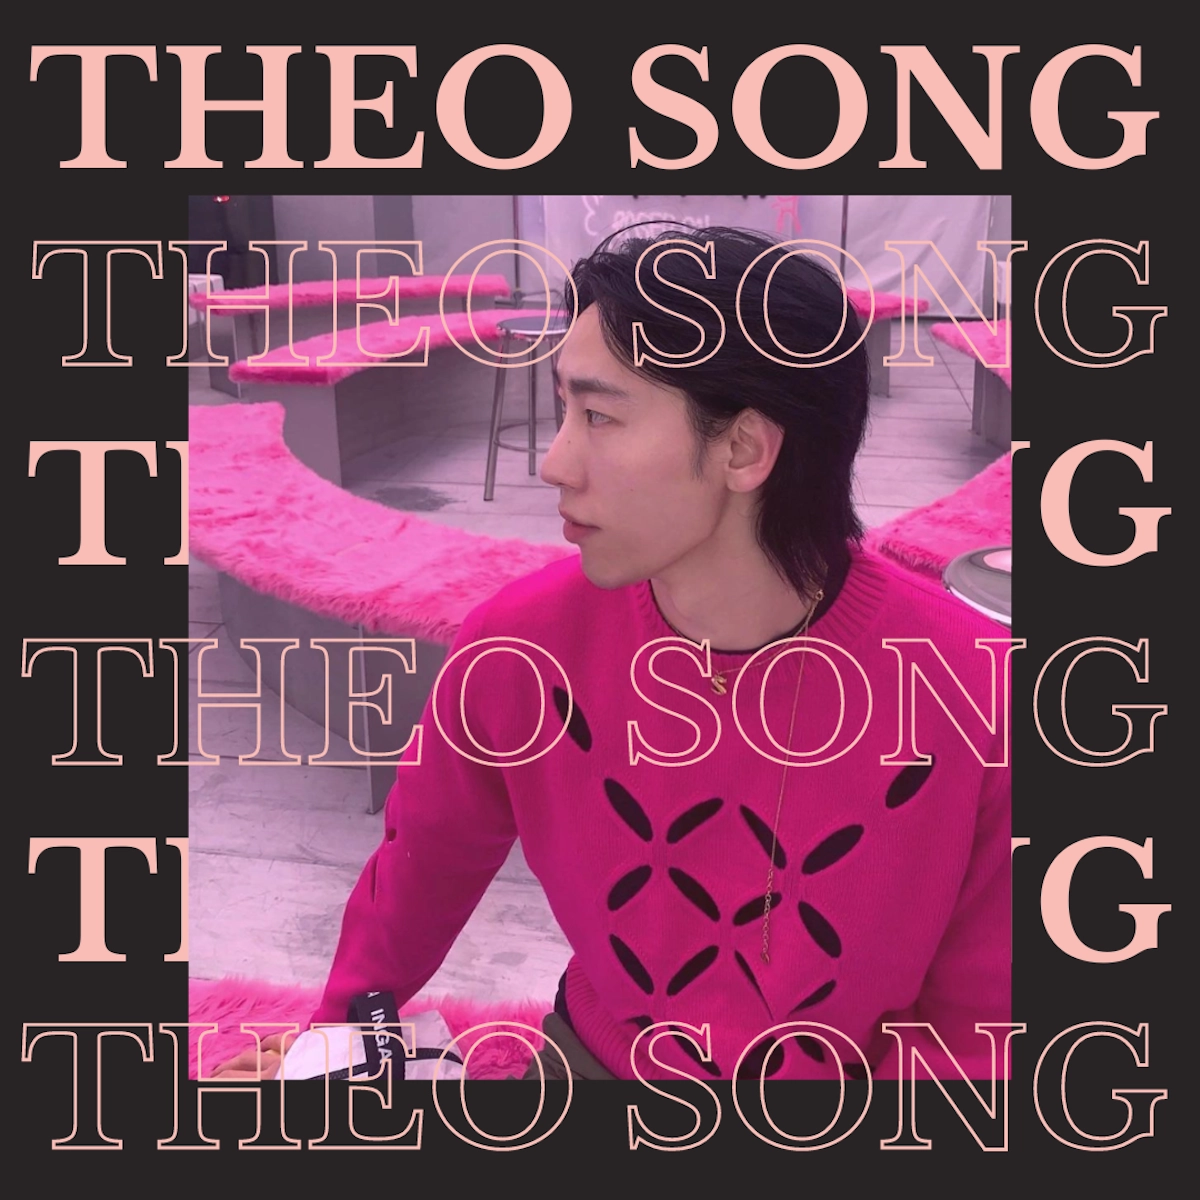 THEO SONG WORKSHOP | NIVEL INICIAL